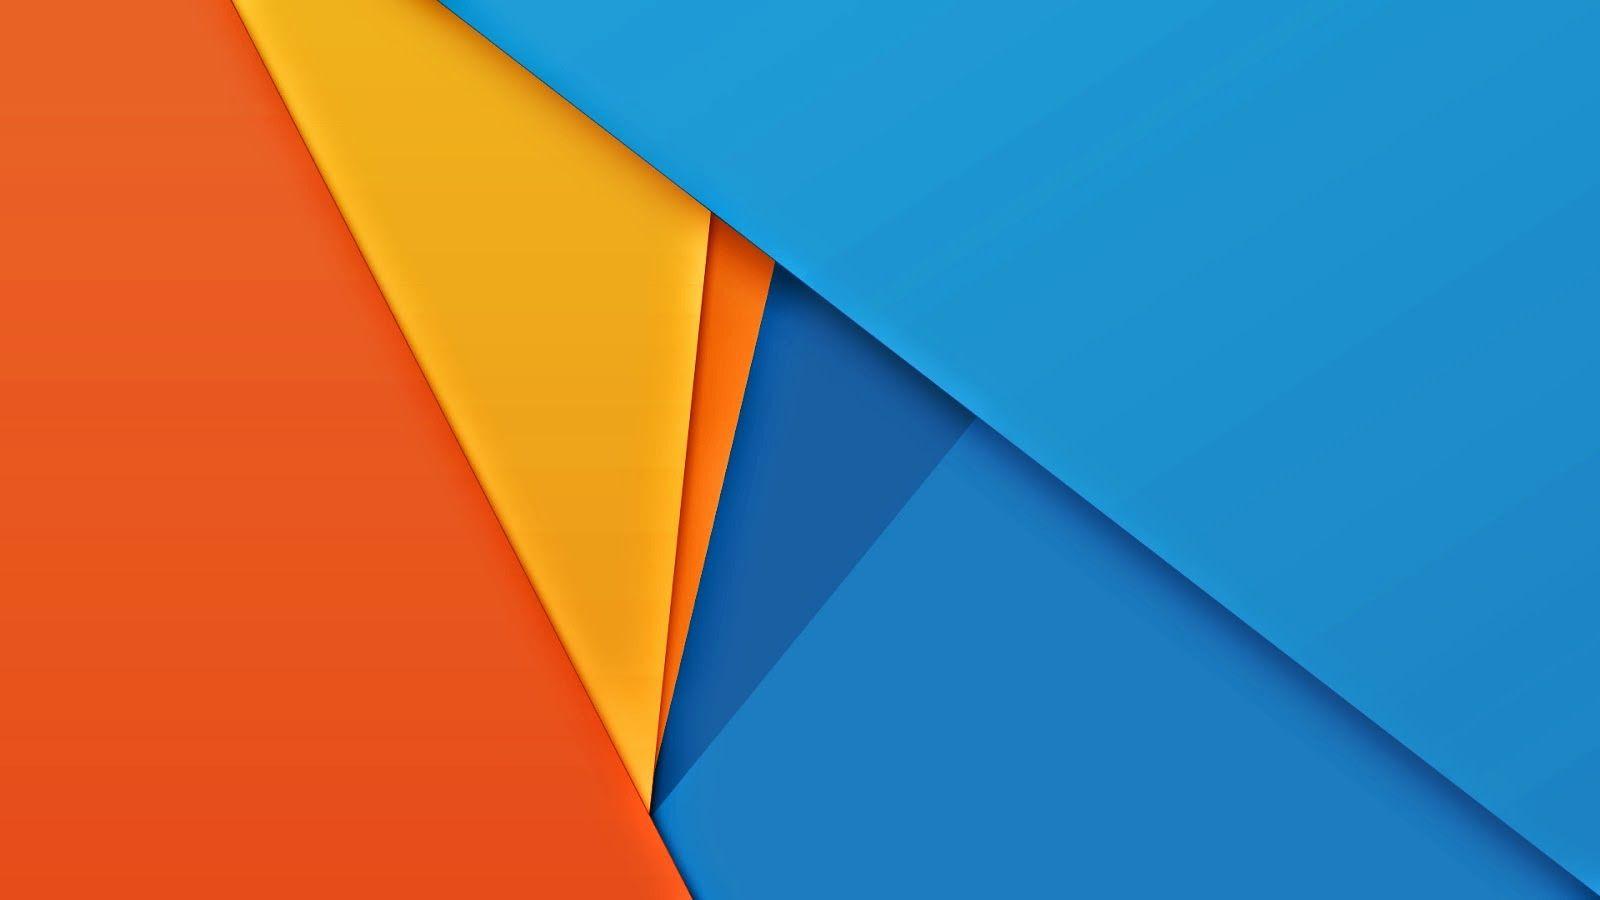 image about Material Design Wallpaper For Mobile